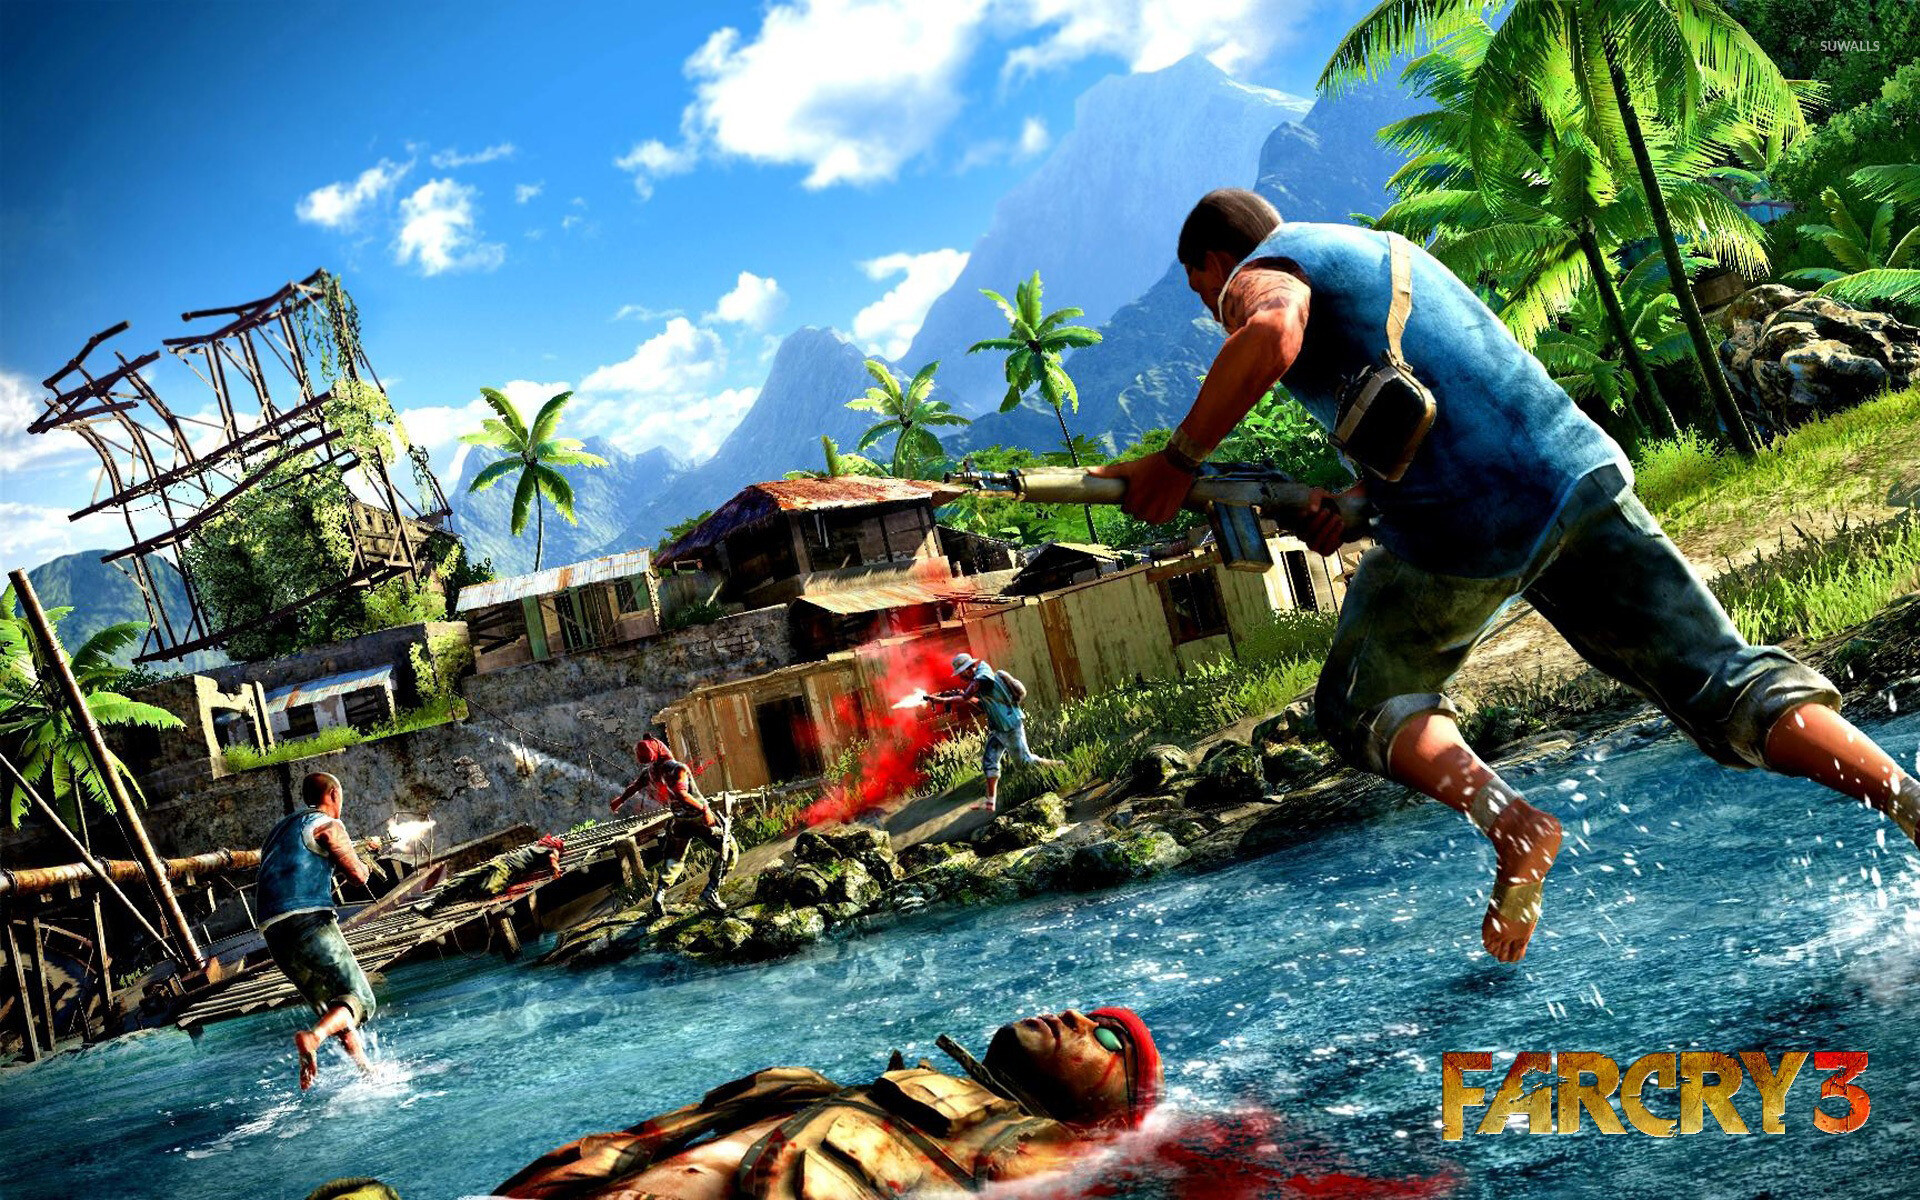 Far Cry 3: It was nominated for multiple year-end accolades including Game of the Year. 1920x1200 HD Background.